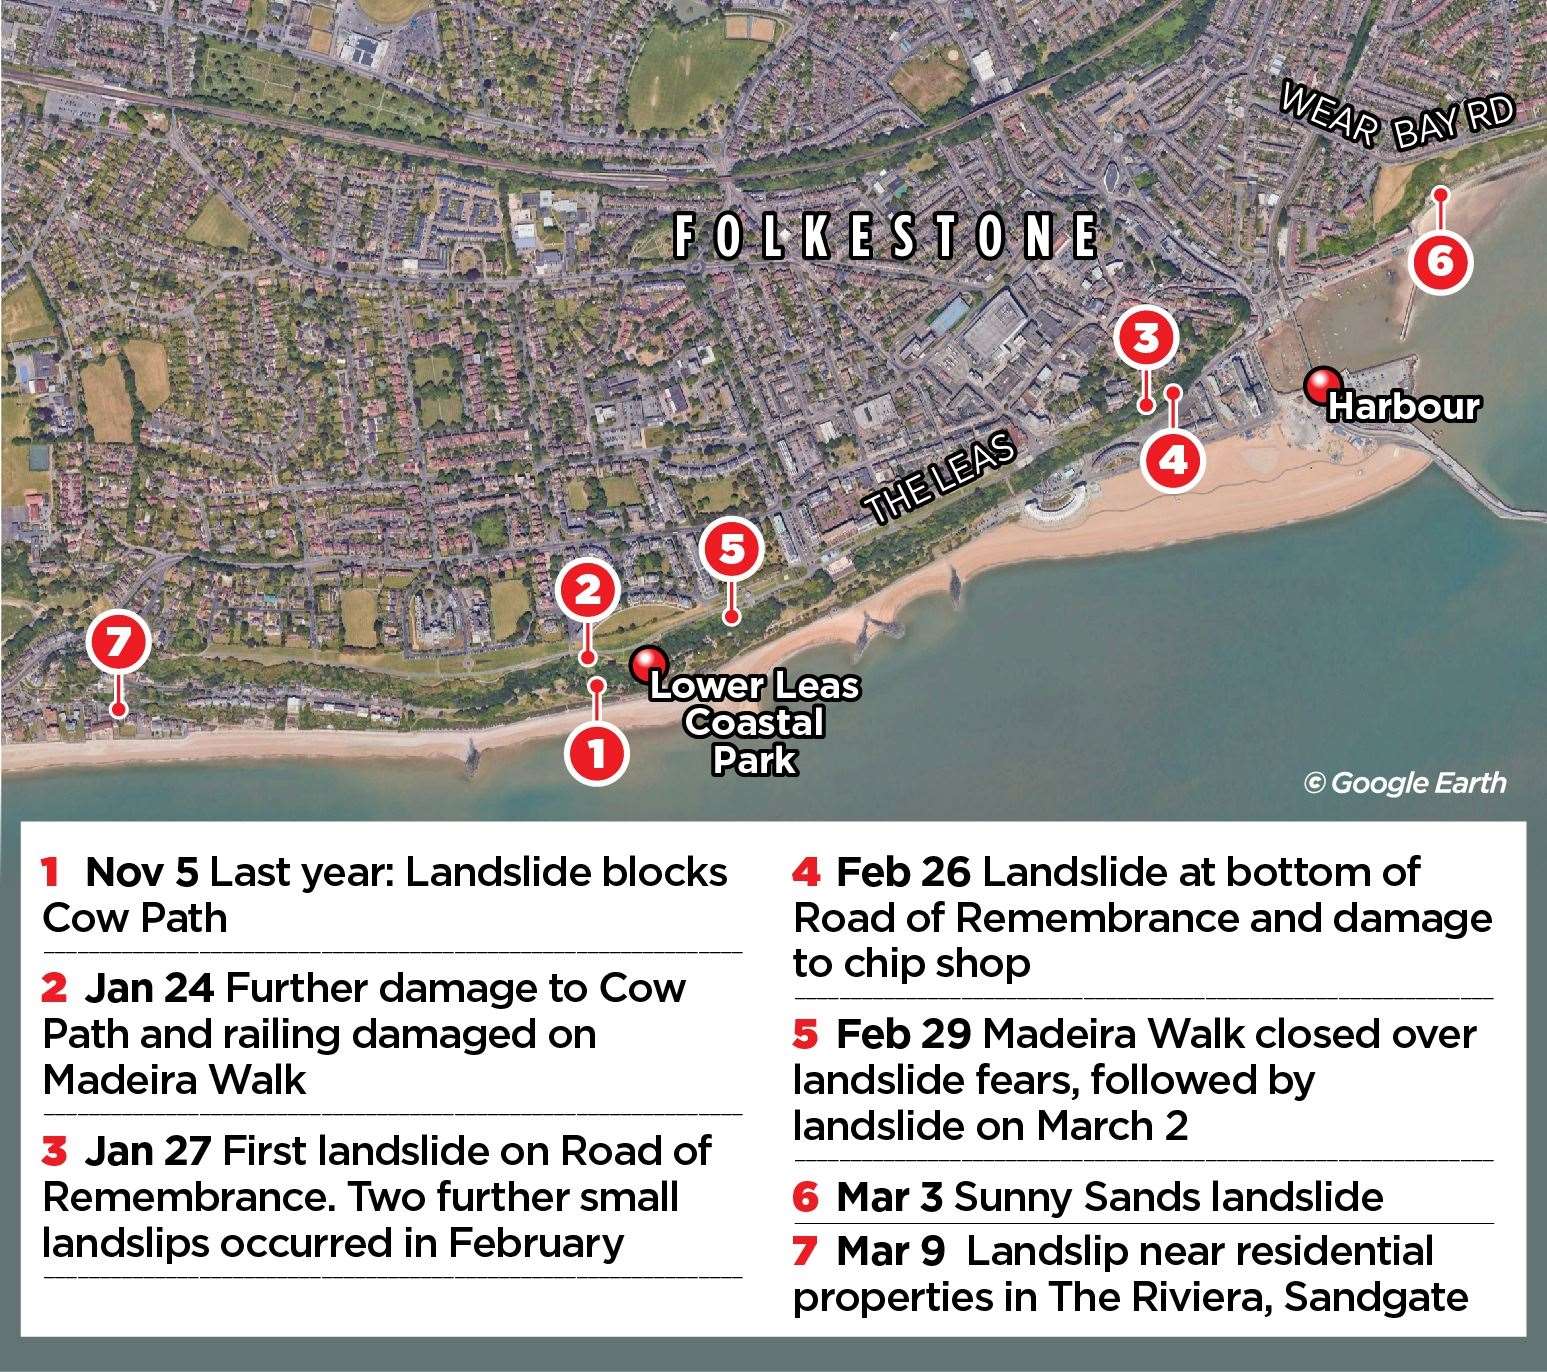 The landslides that have hit Folkestone, which neighbours Sandgate, over the past few months